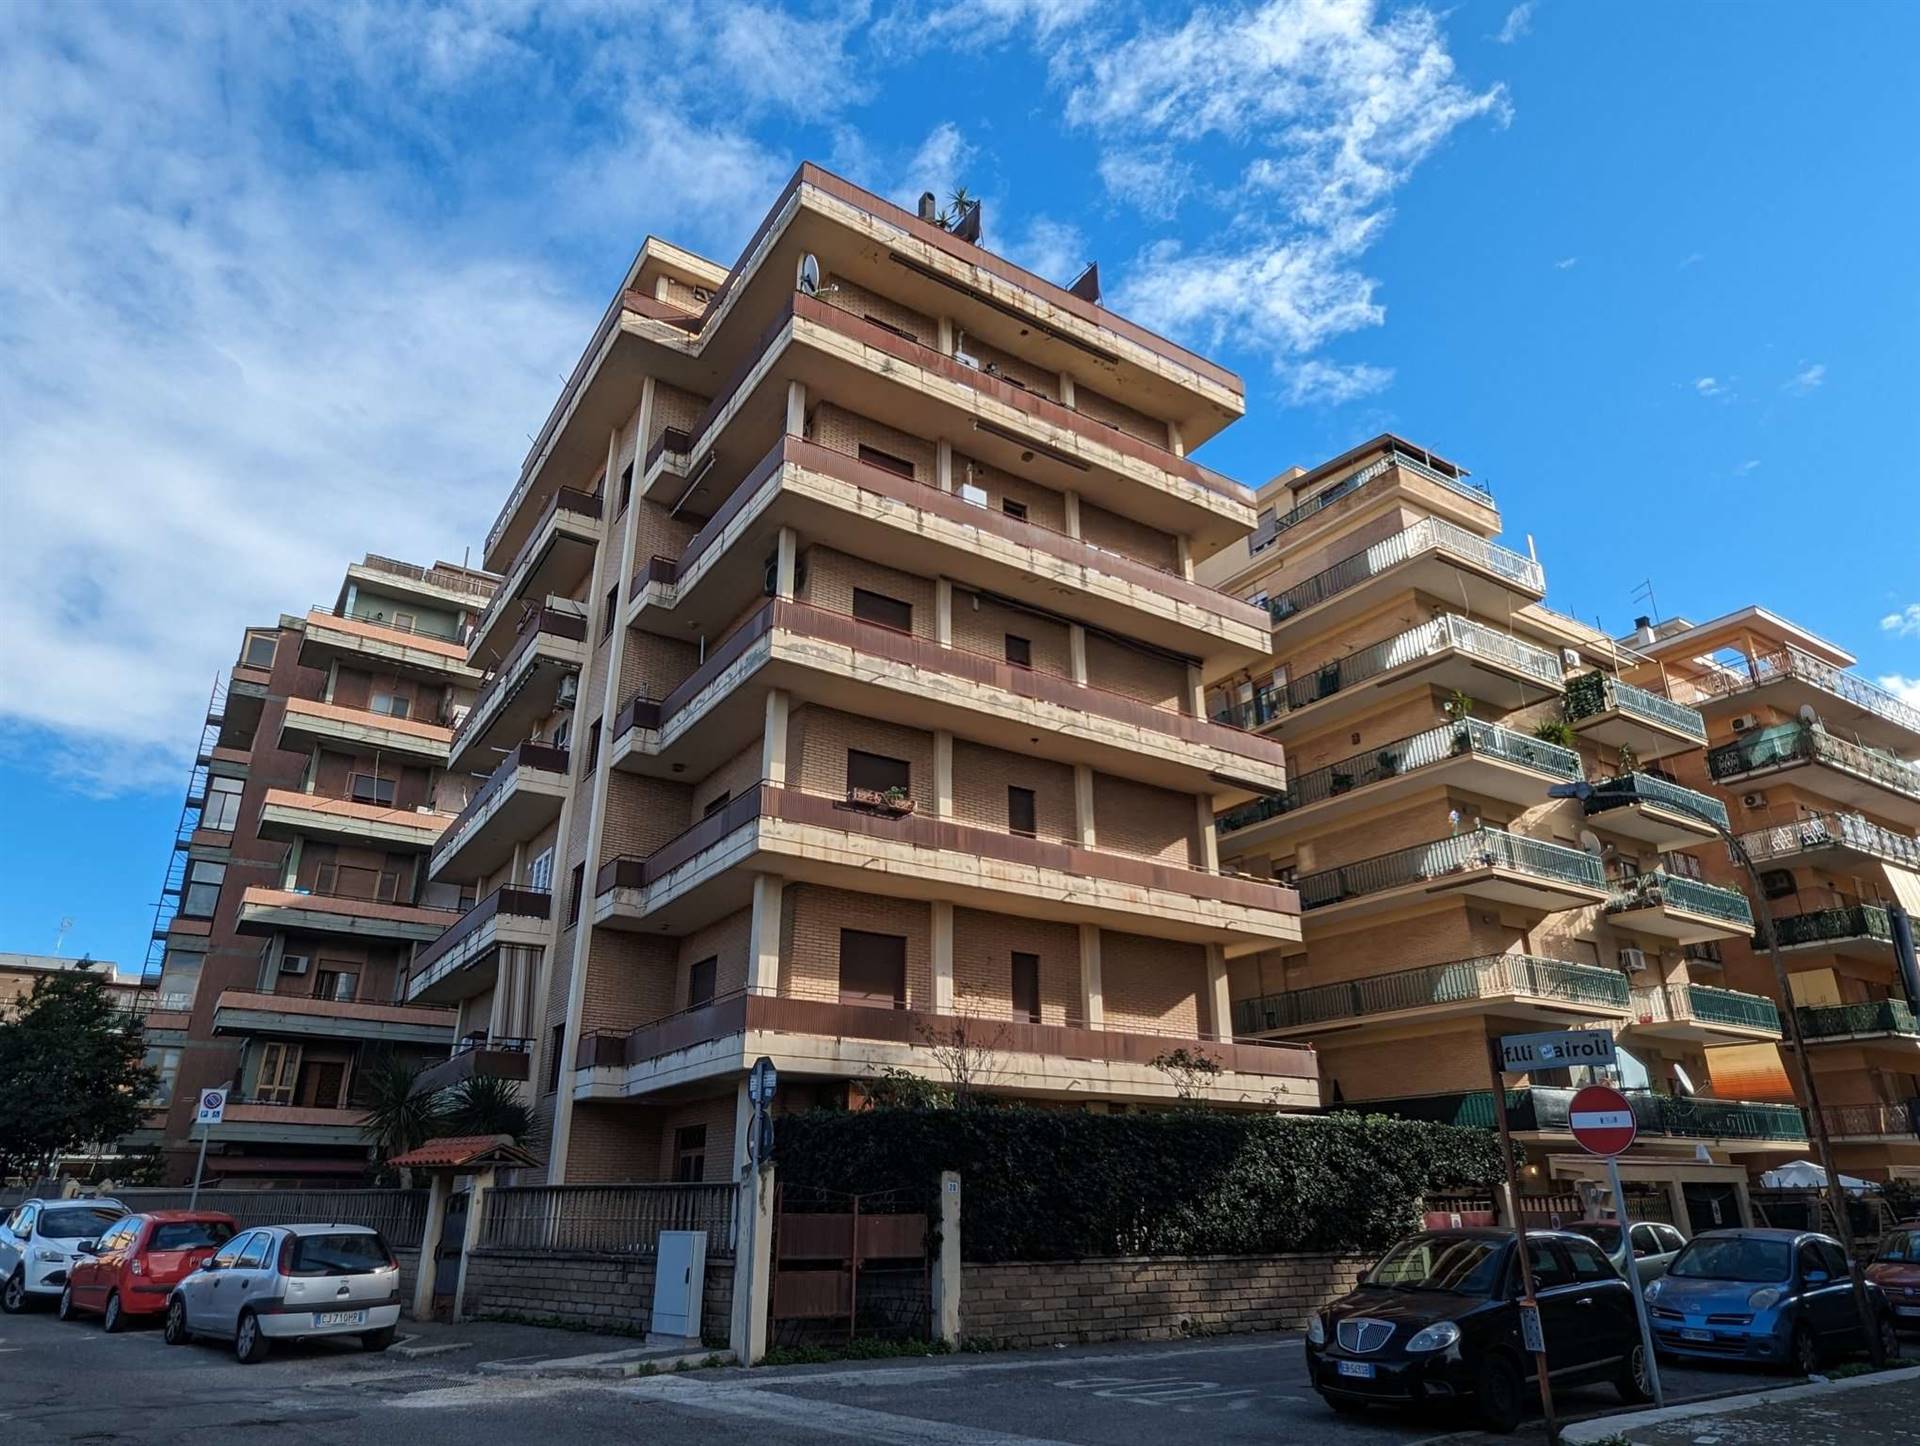 DOMITILLA, LADISPOLI, Apartment for sale of 80 Sq. mt., Be restored, Heating Individual heating system, Energetic class: G, placed at 5° on 6, 